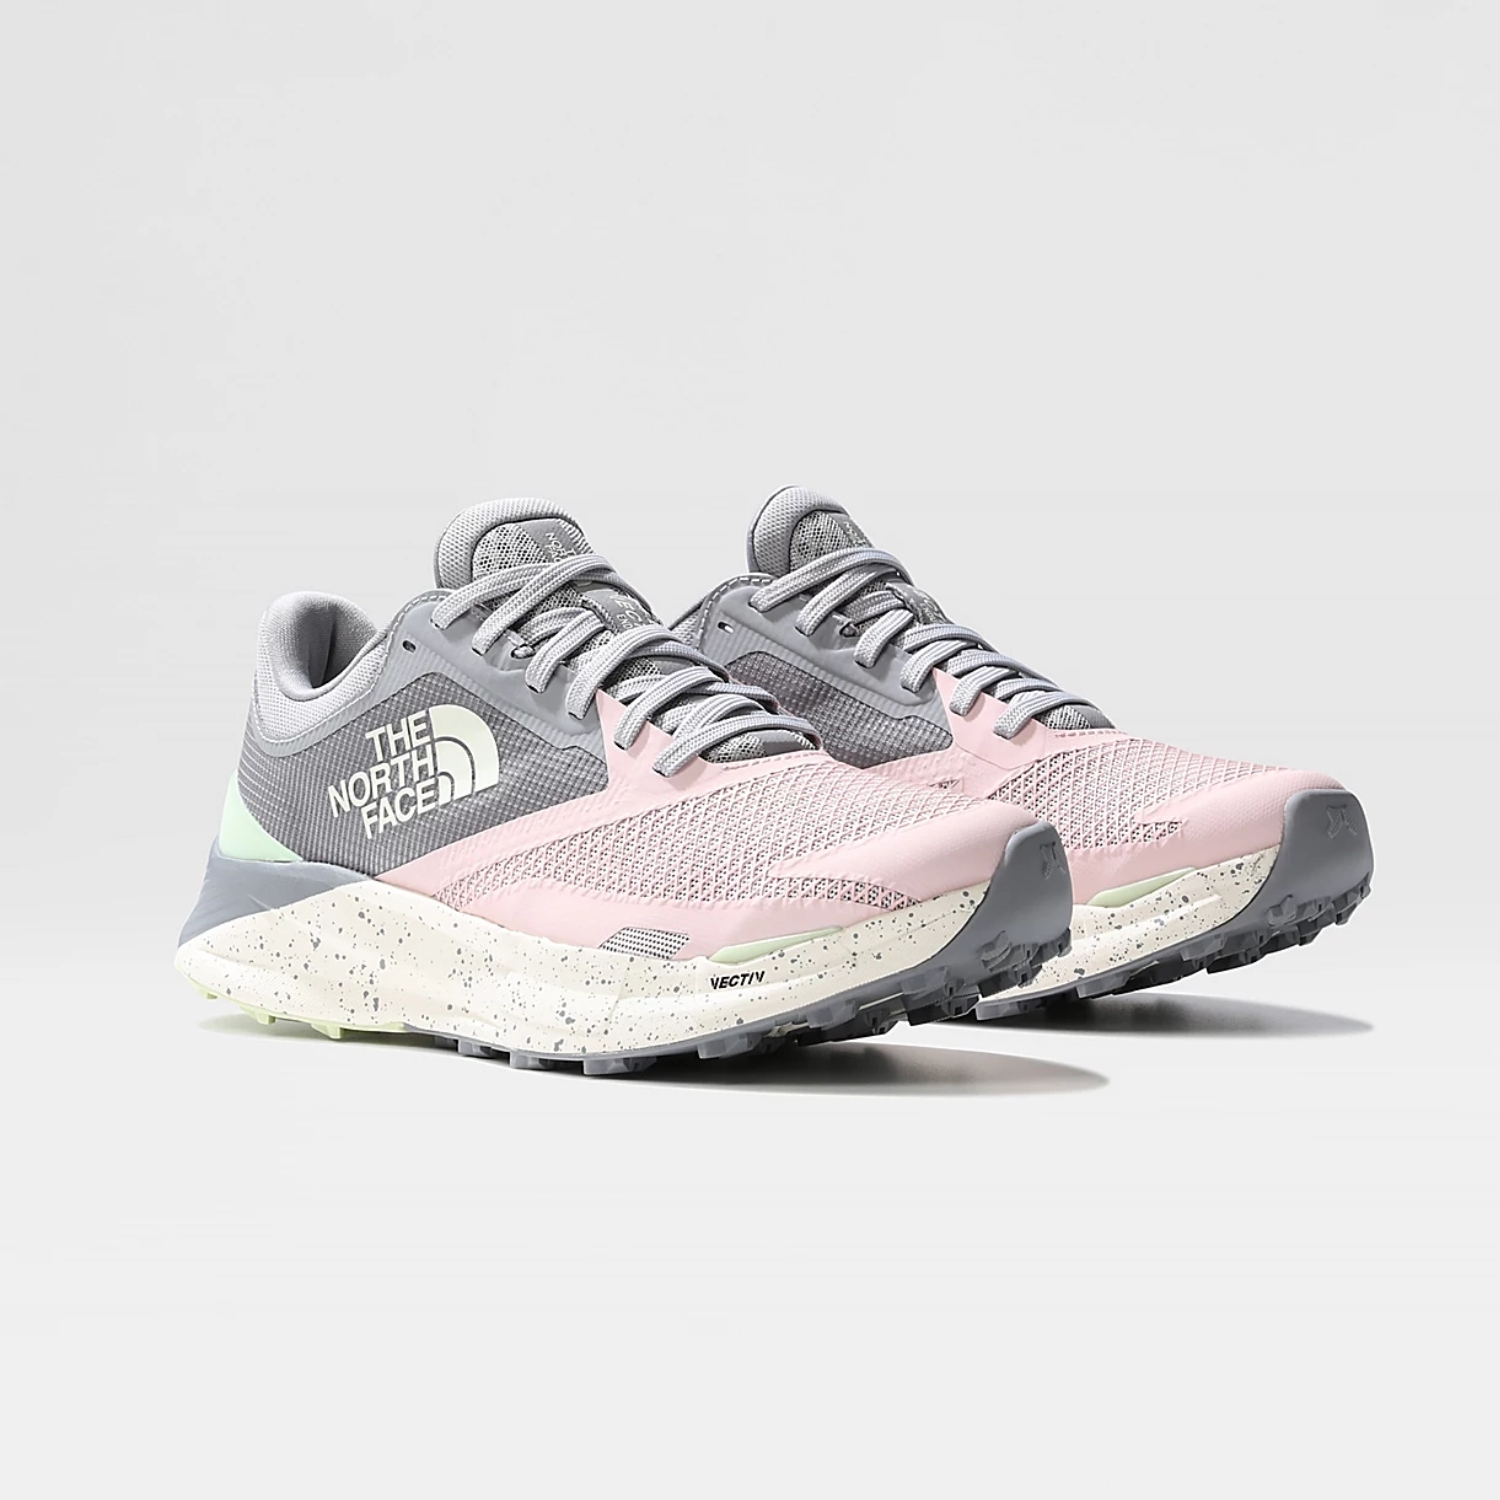 Buty do biegania damskie The North Face Vectiv Enduris III purdy pink/meld grey - 37